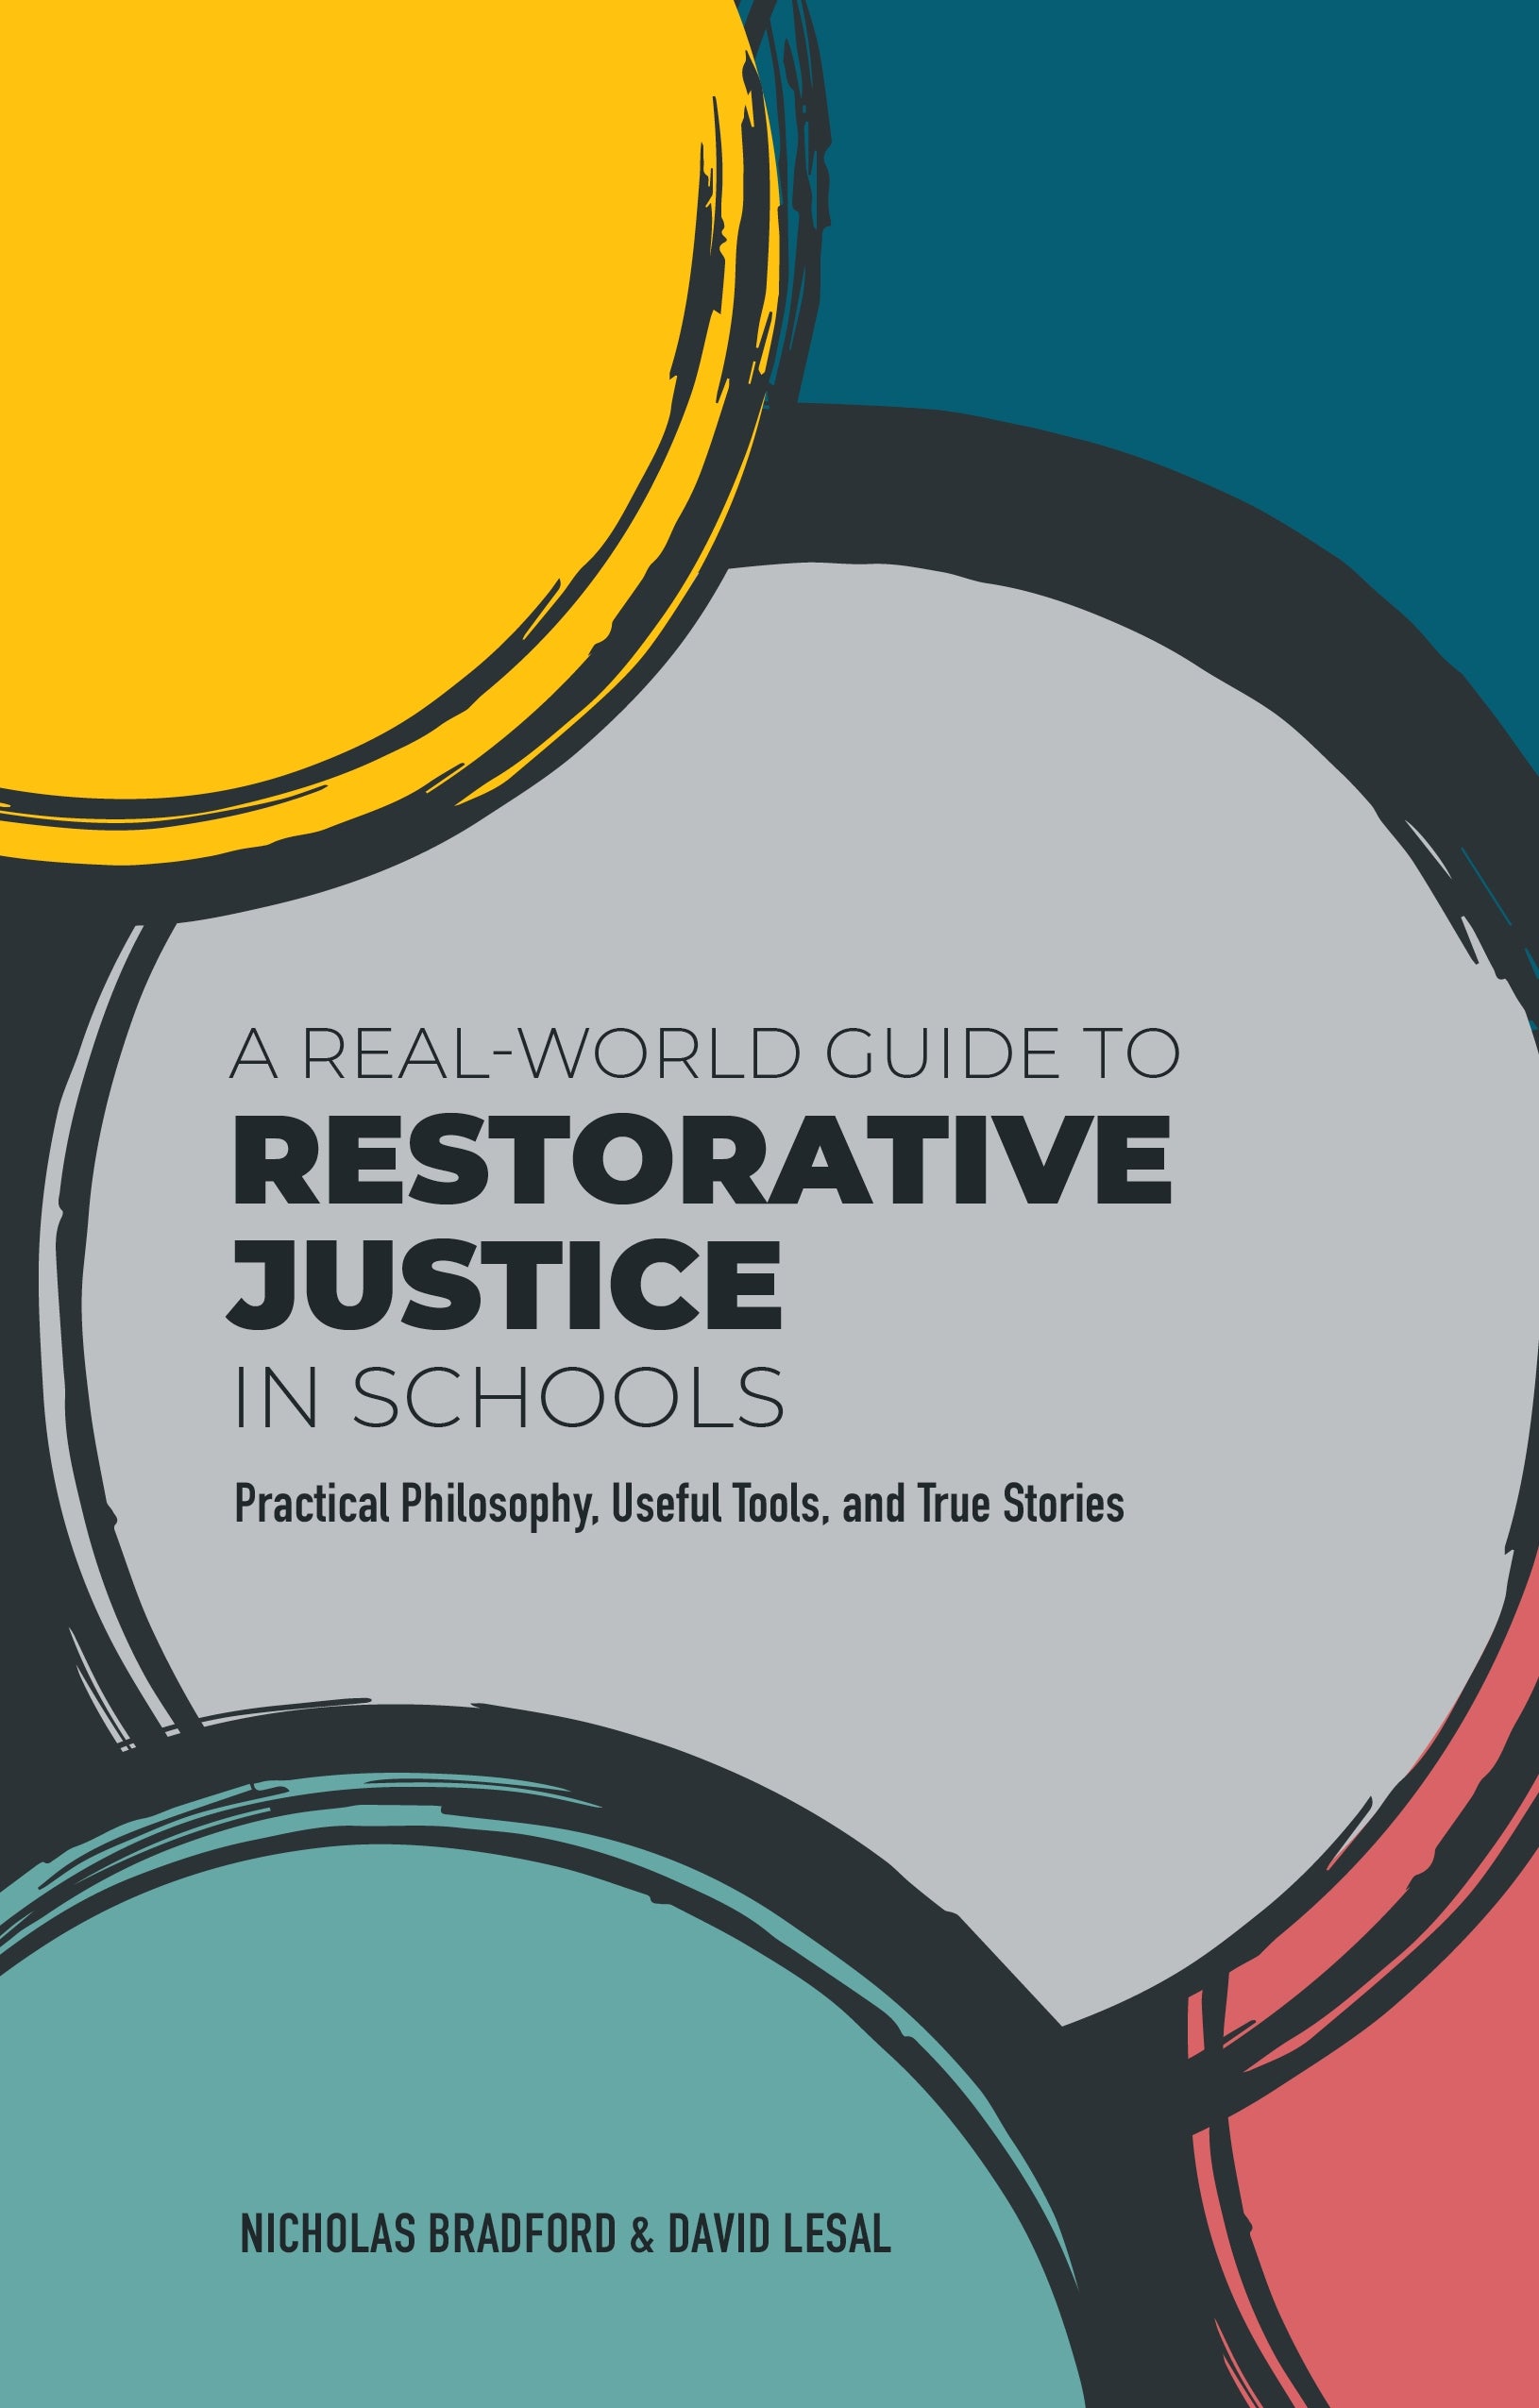 A Real-World Guide to Restorative Justice in Schools by Nicholas Bradford, David LeSal